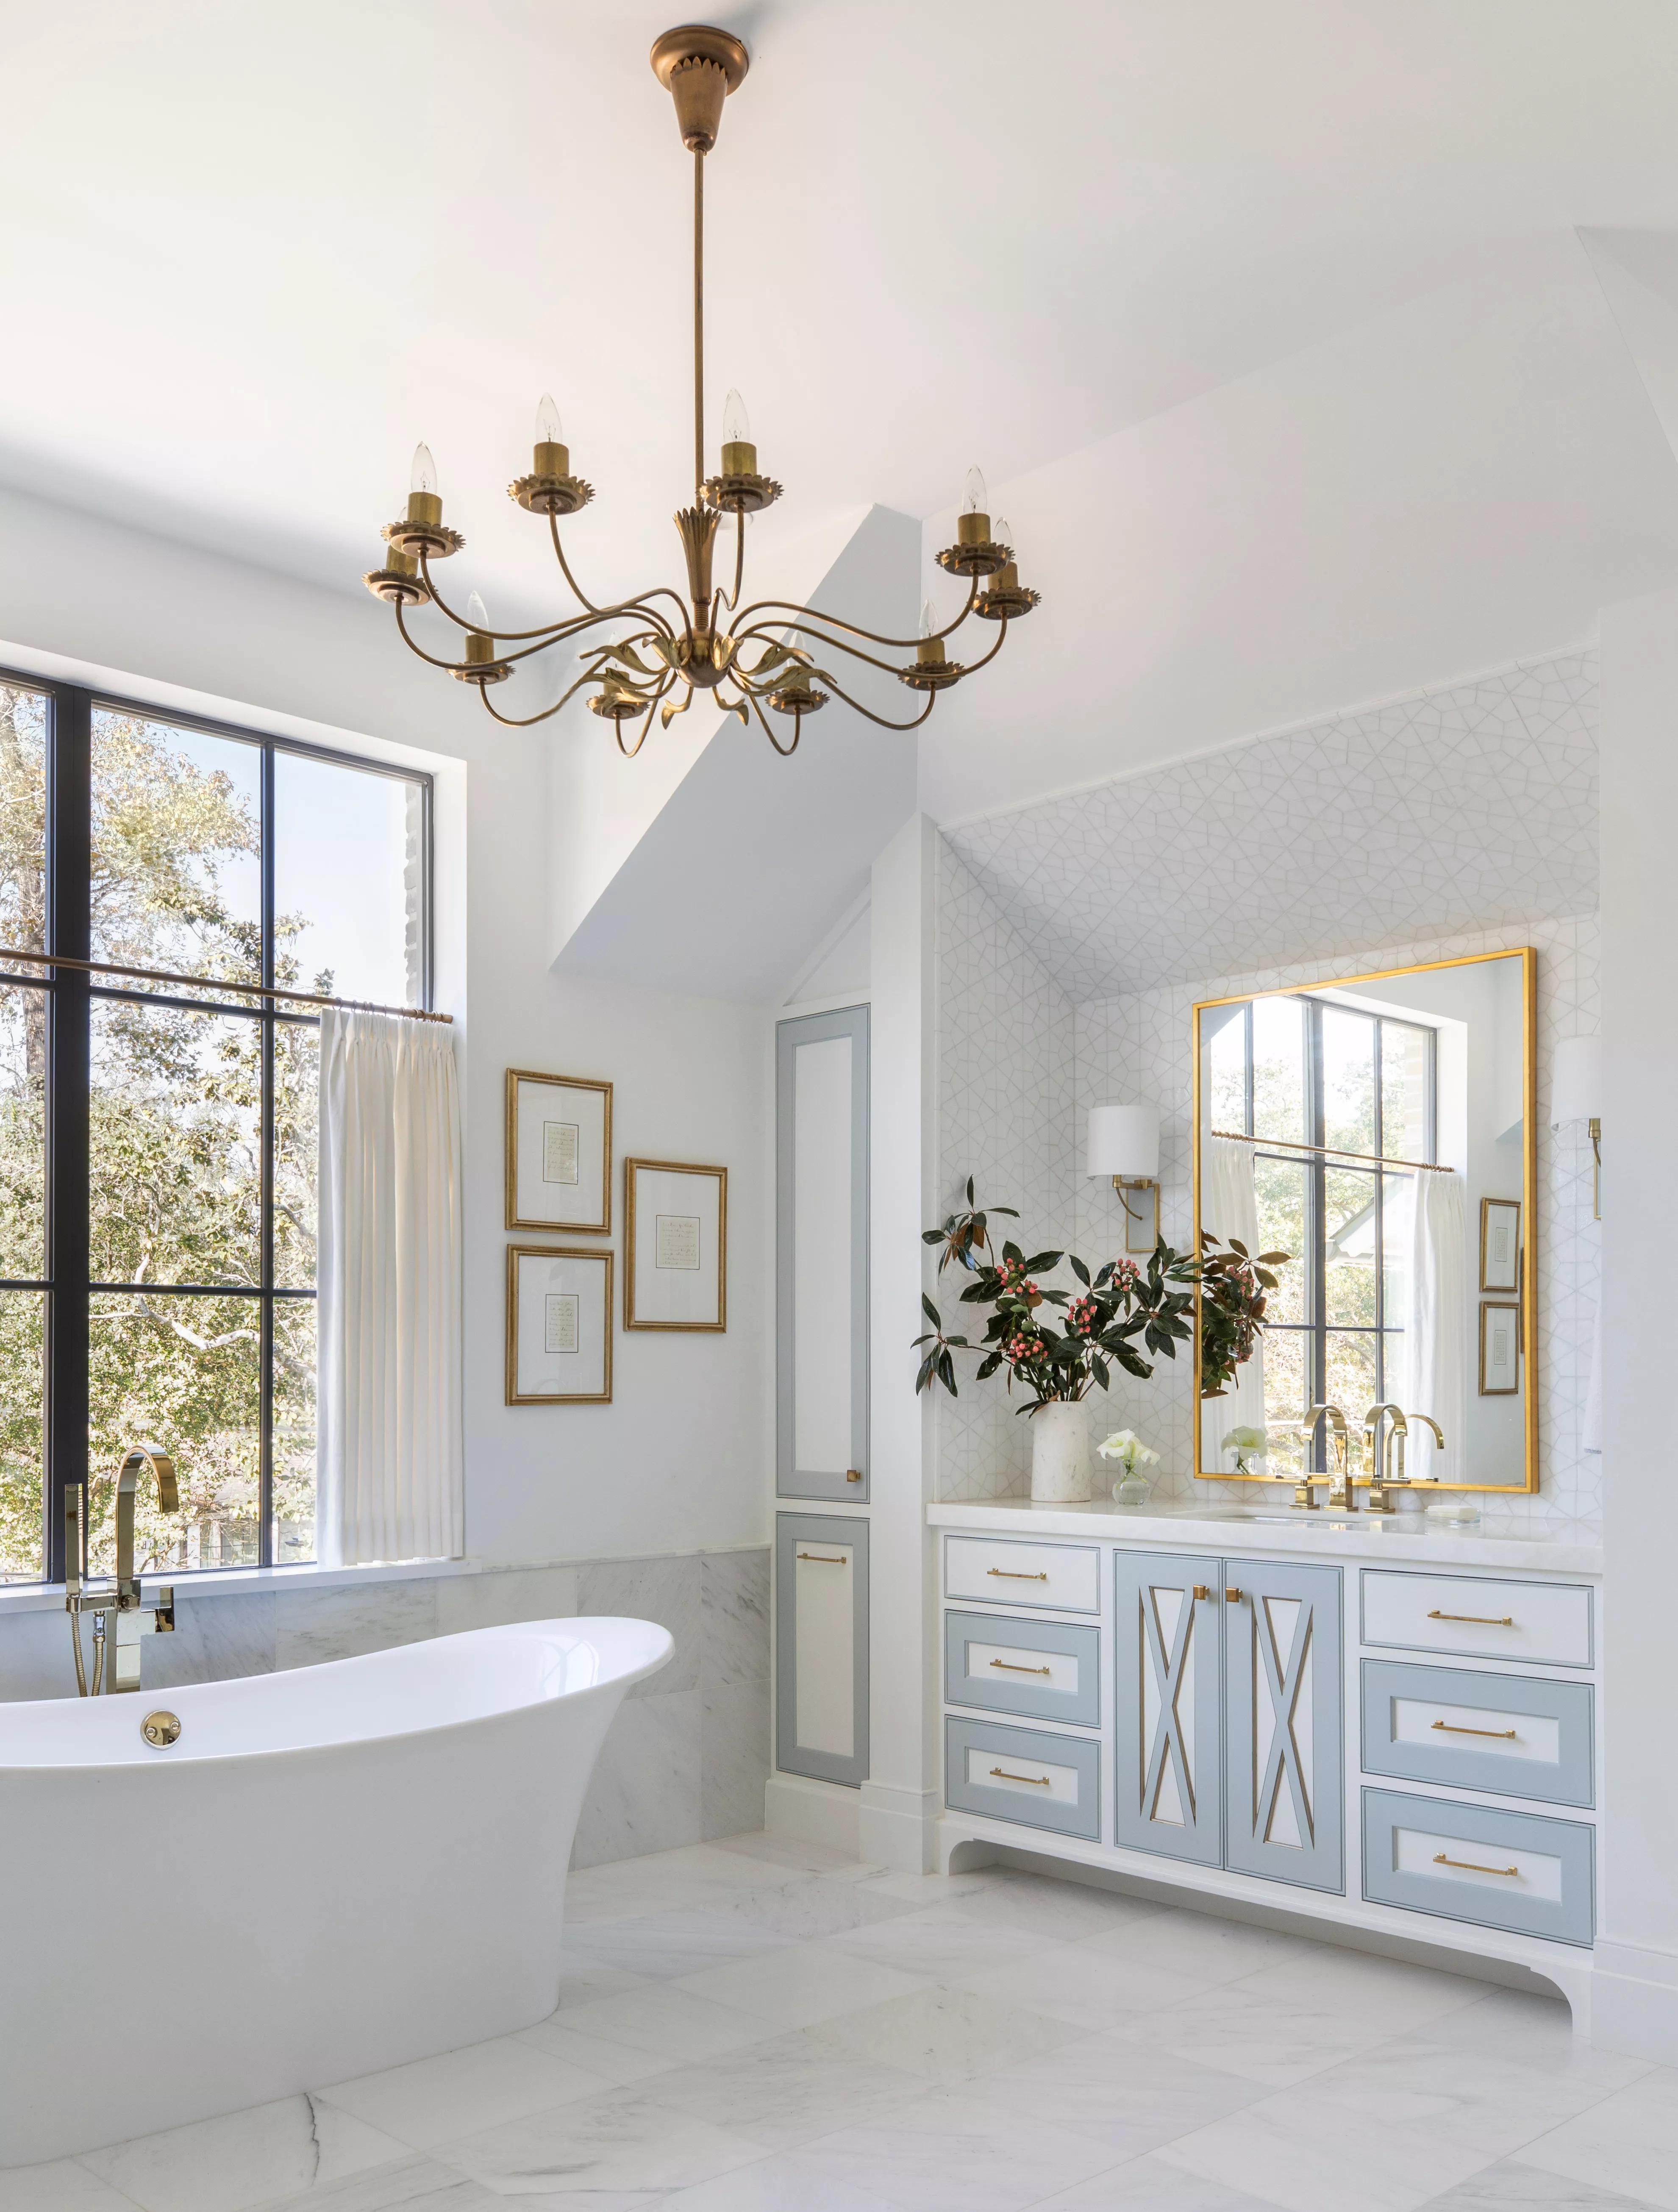 Bathroom with white walls and tub and a gold chandelier